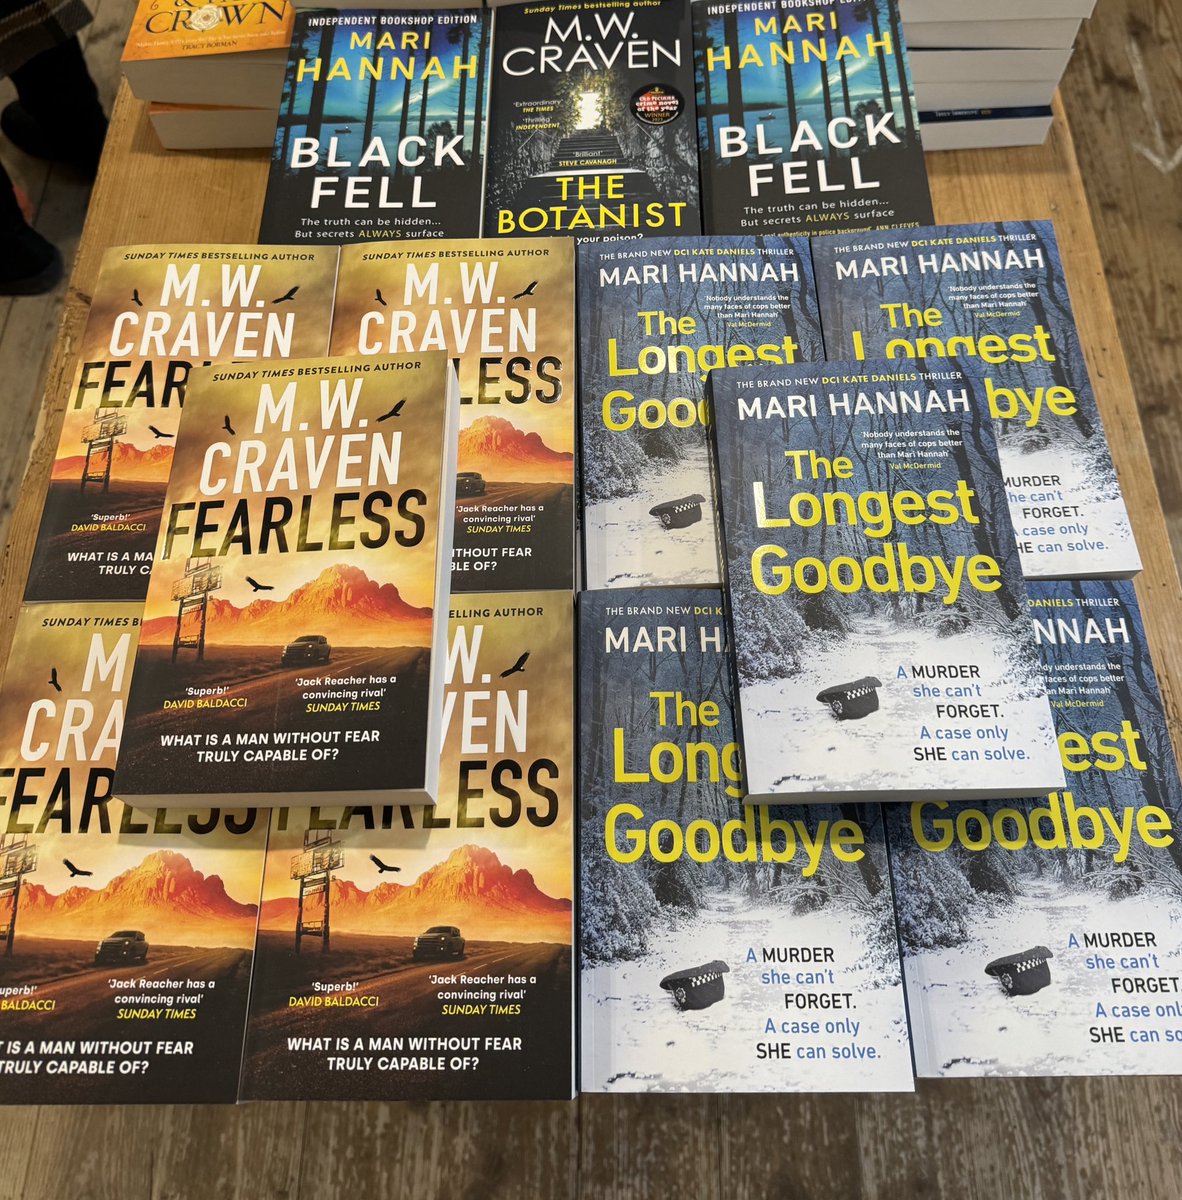 Thank you @mainstreethare for hosting @MWCravenUK and I this afternoon. Lovely to speak to a full house. Such a warm and welcoming audience. Thanks also for your hospitality and book gift. A perfect afternoon. #happyreadersandwriters